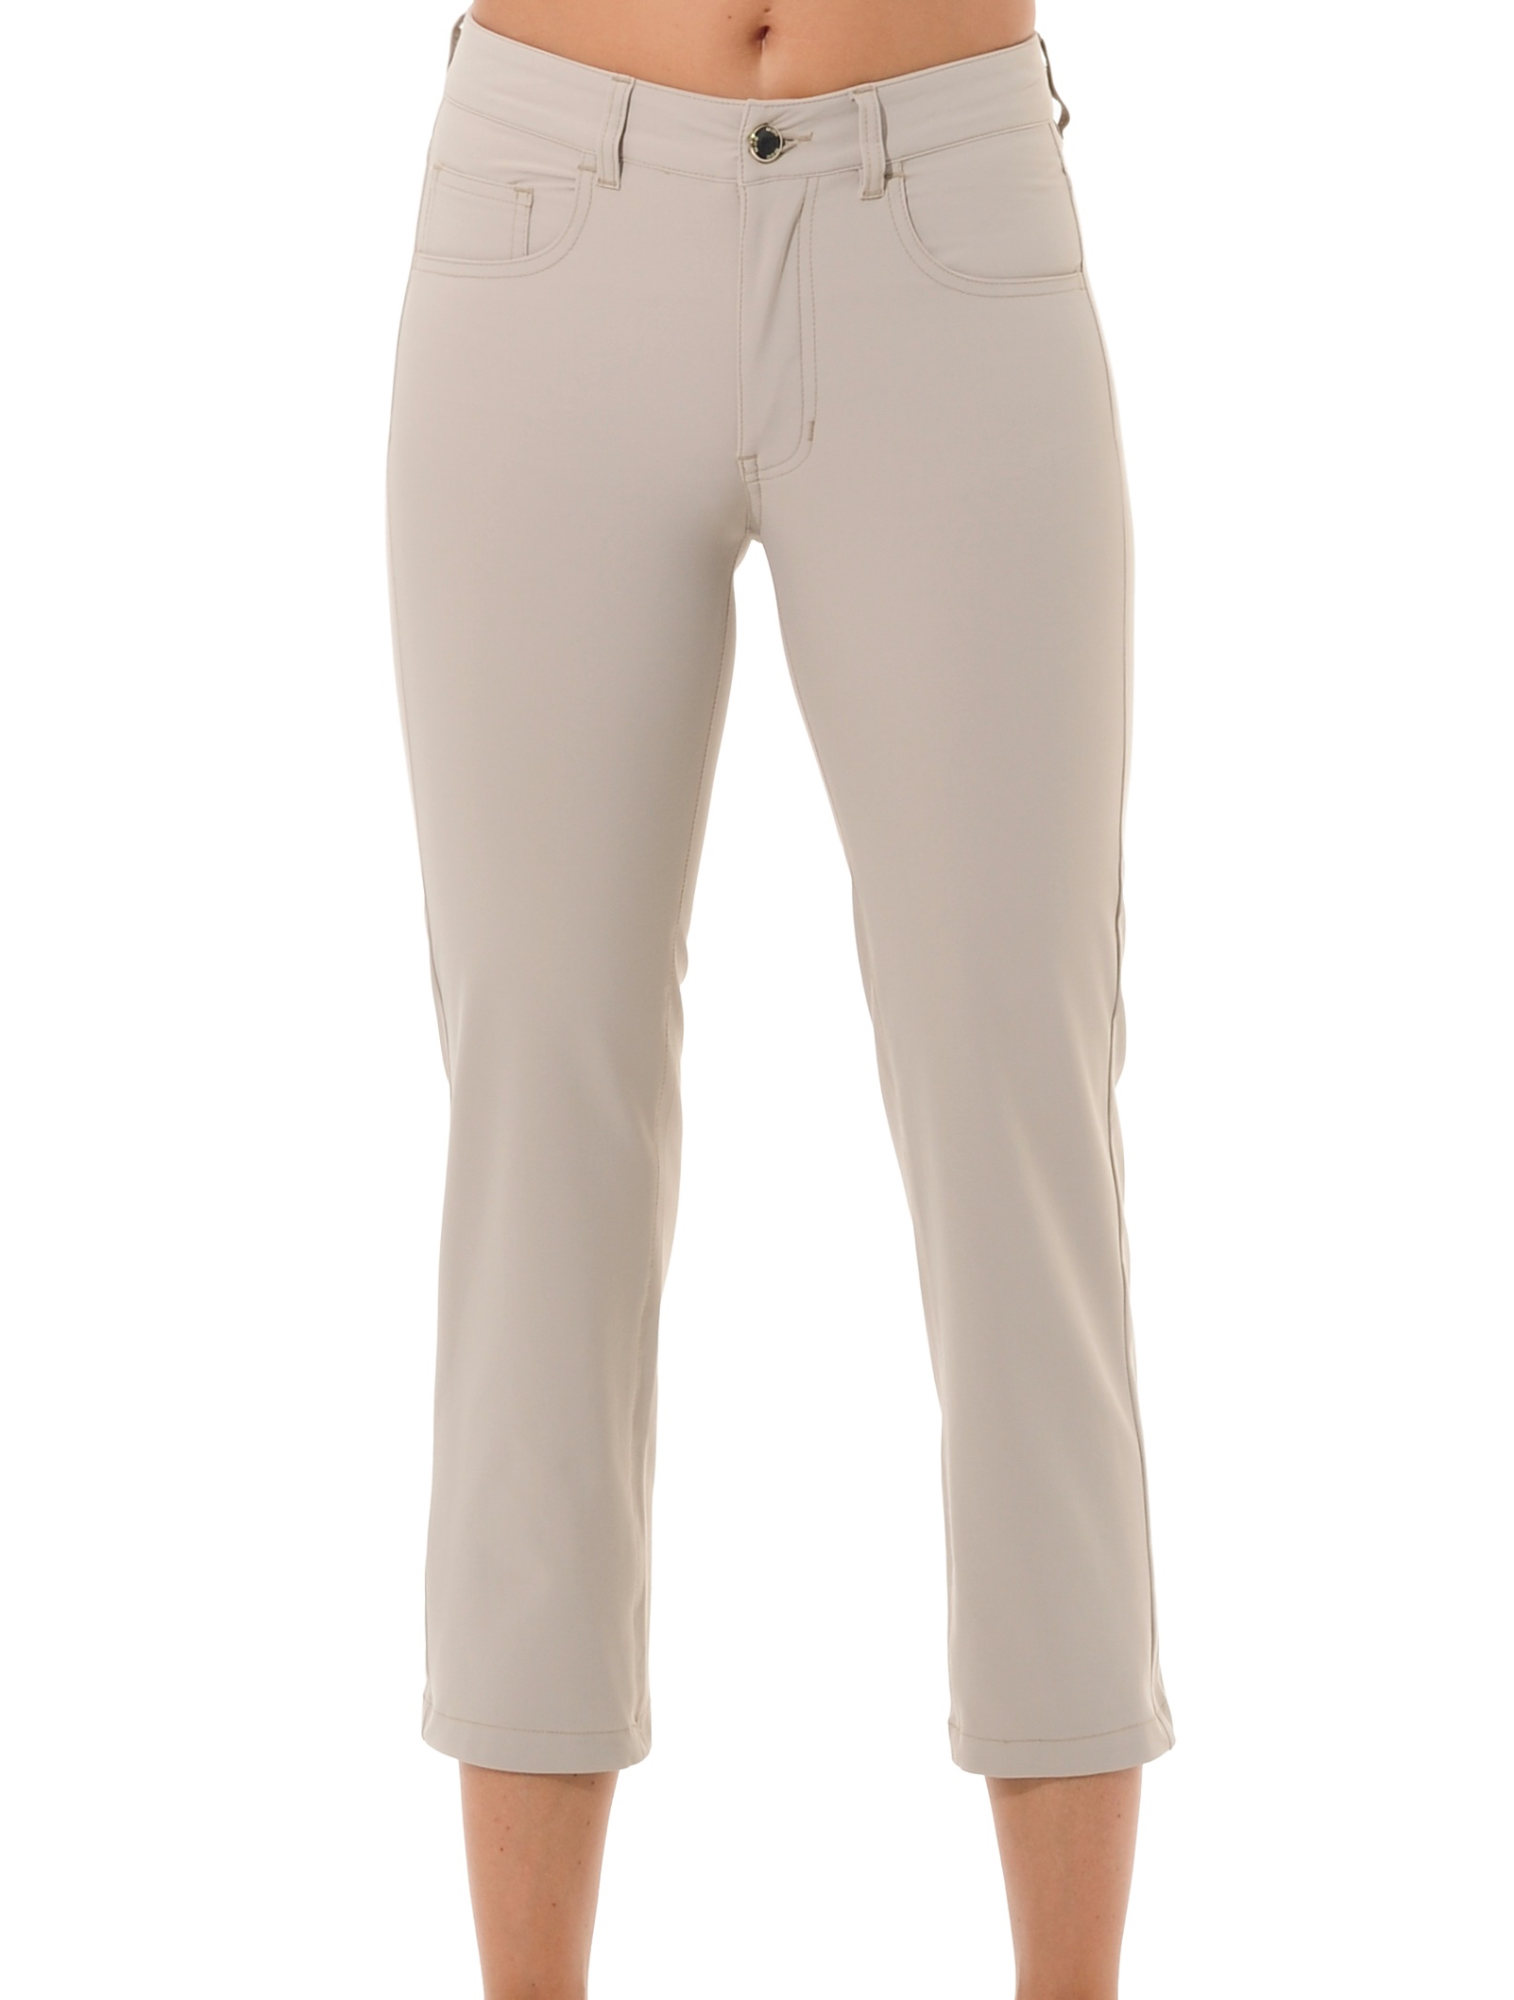 4way stretch cropped straight cut pants light taupe 